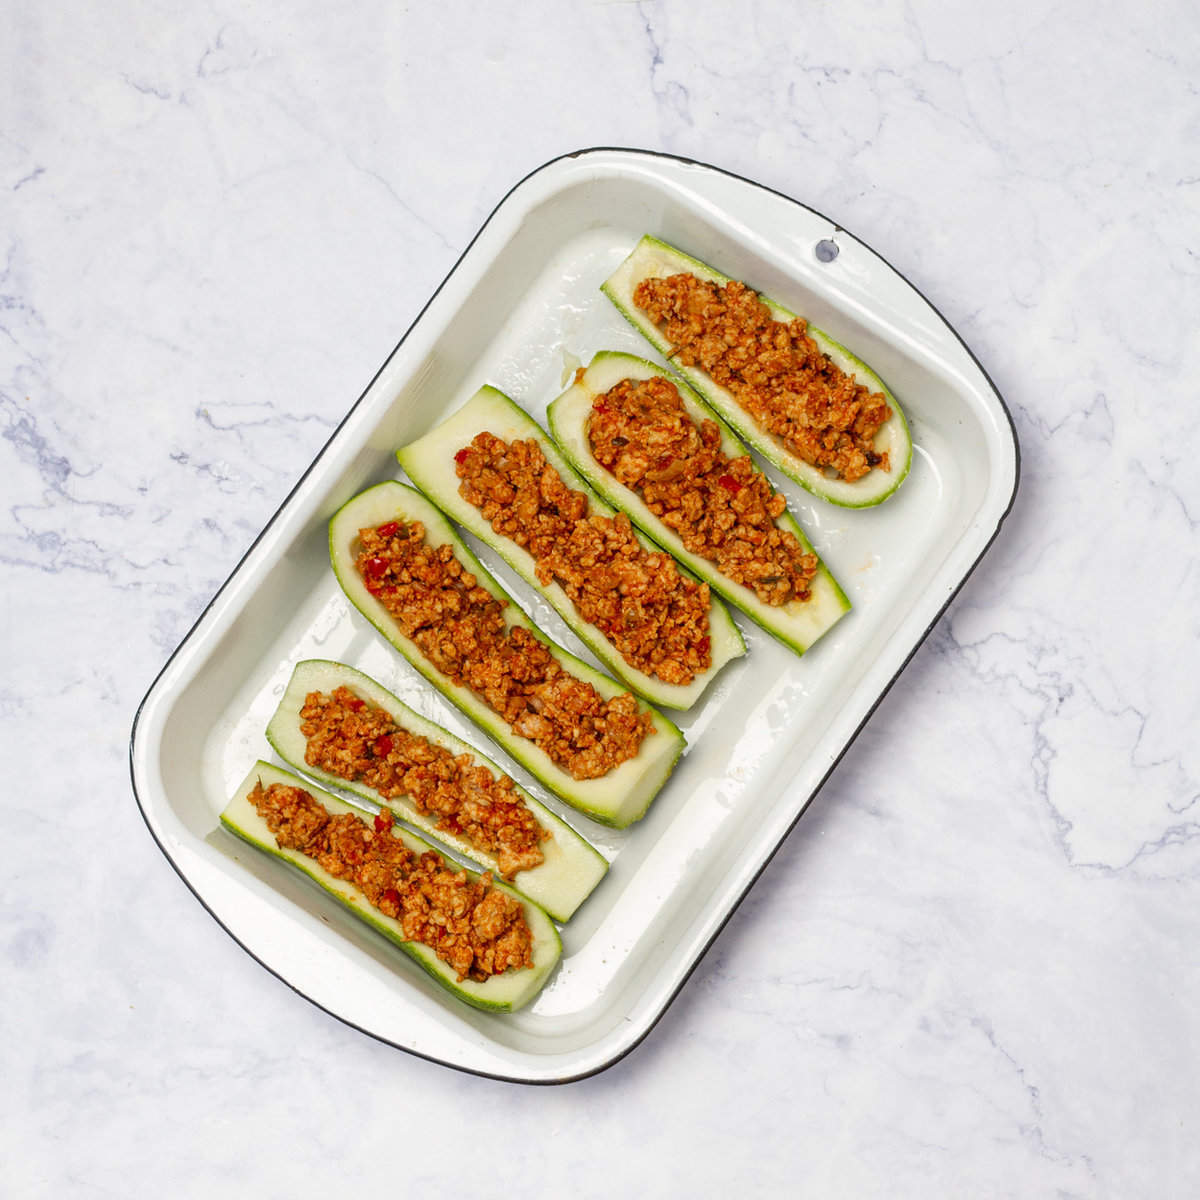 Fill each Zucchini boat with the ground chicken mixture